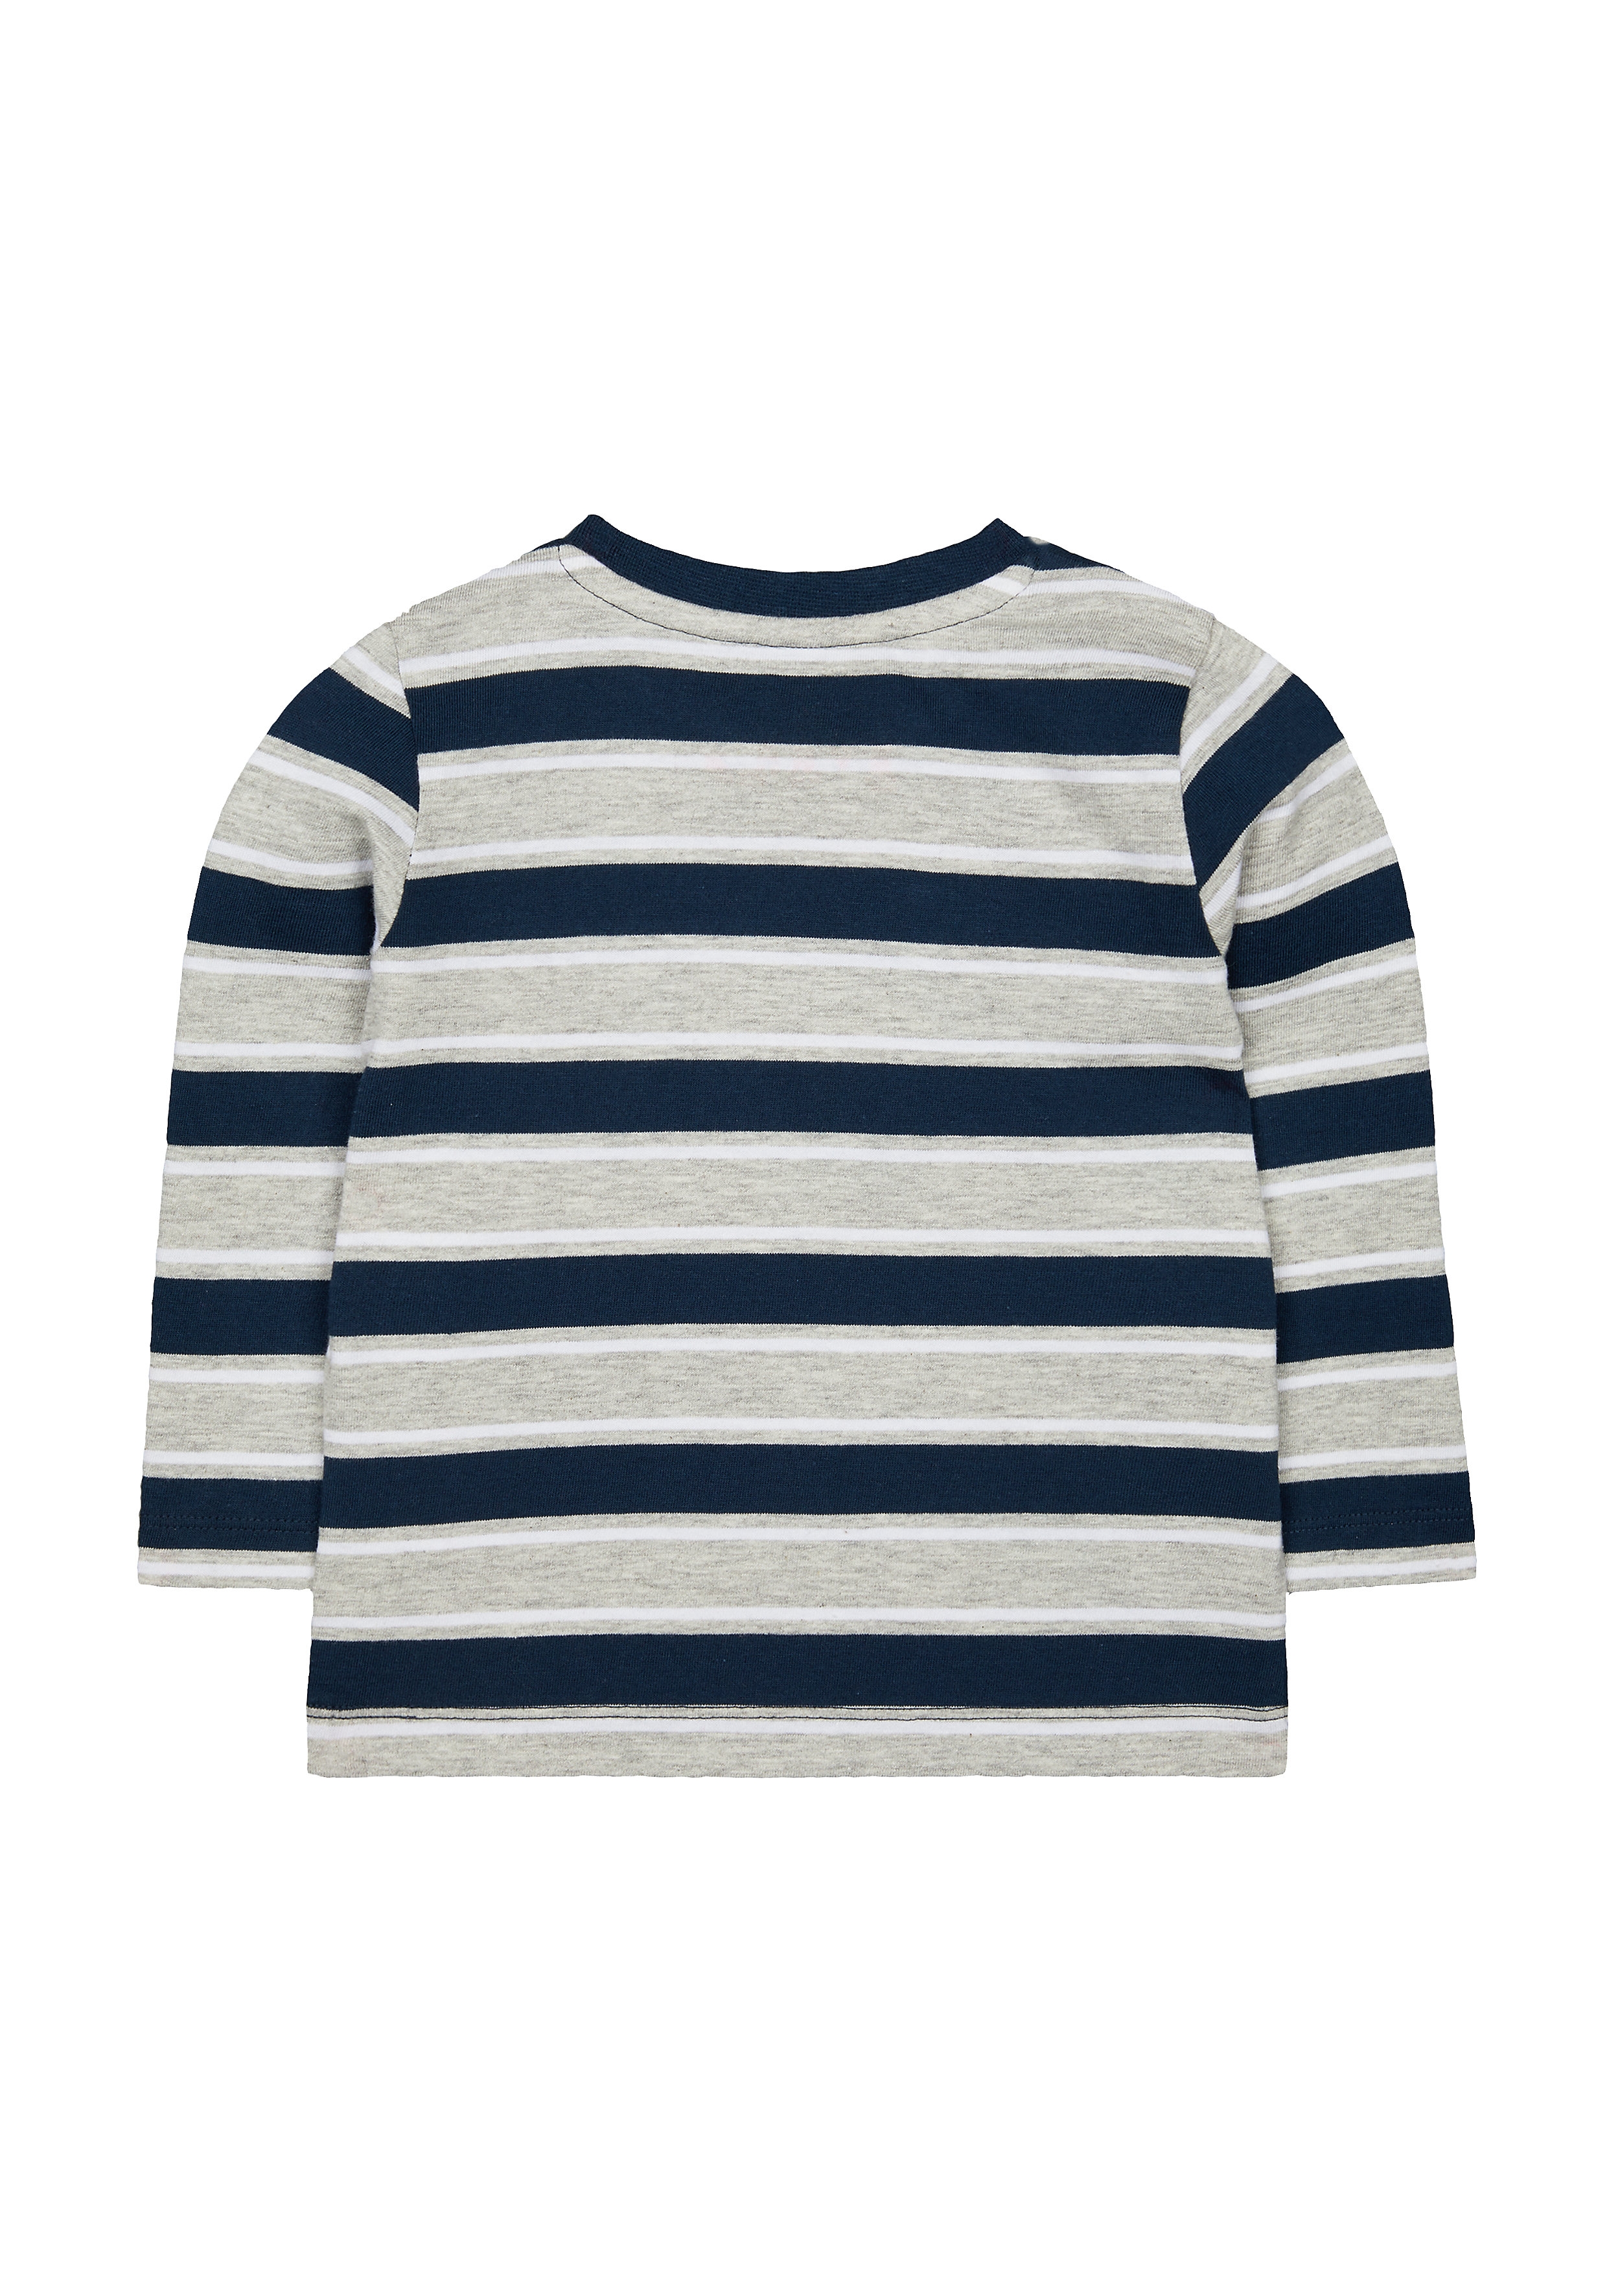 Mothercare | Boys Full Sleeves T-Shirt Striped - Multicolor 1